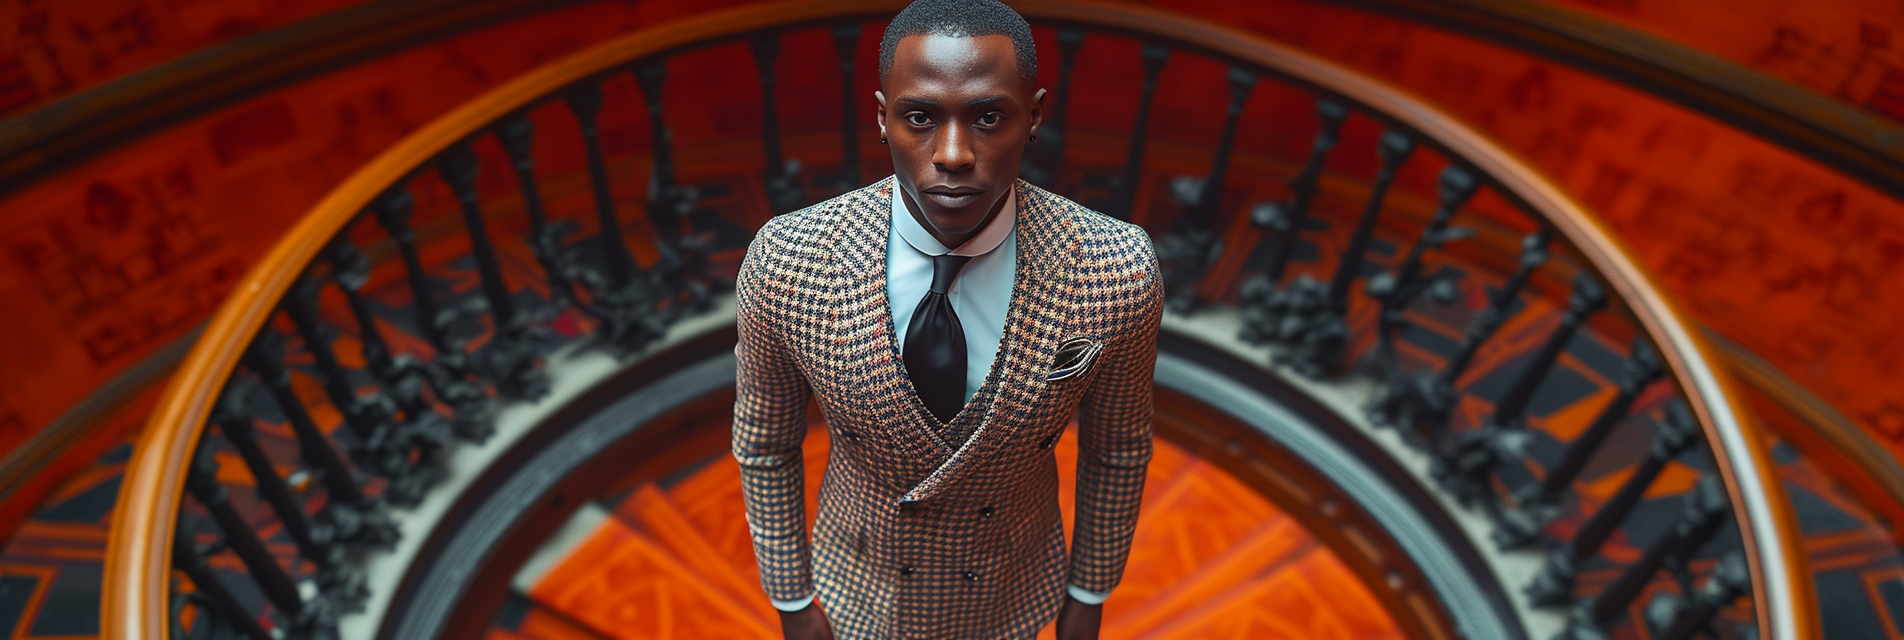 A man stands confidently in a houndstooth-patterned suit, viewed from above. He is positioned at the center of a circular staircase with an ornate railing and a richly colored floor.